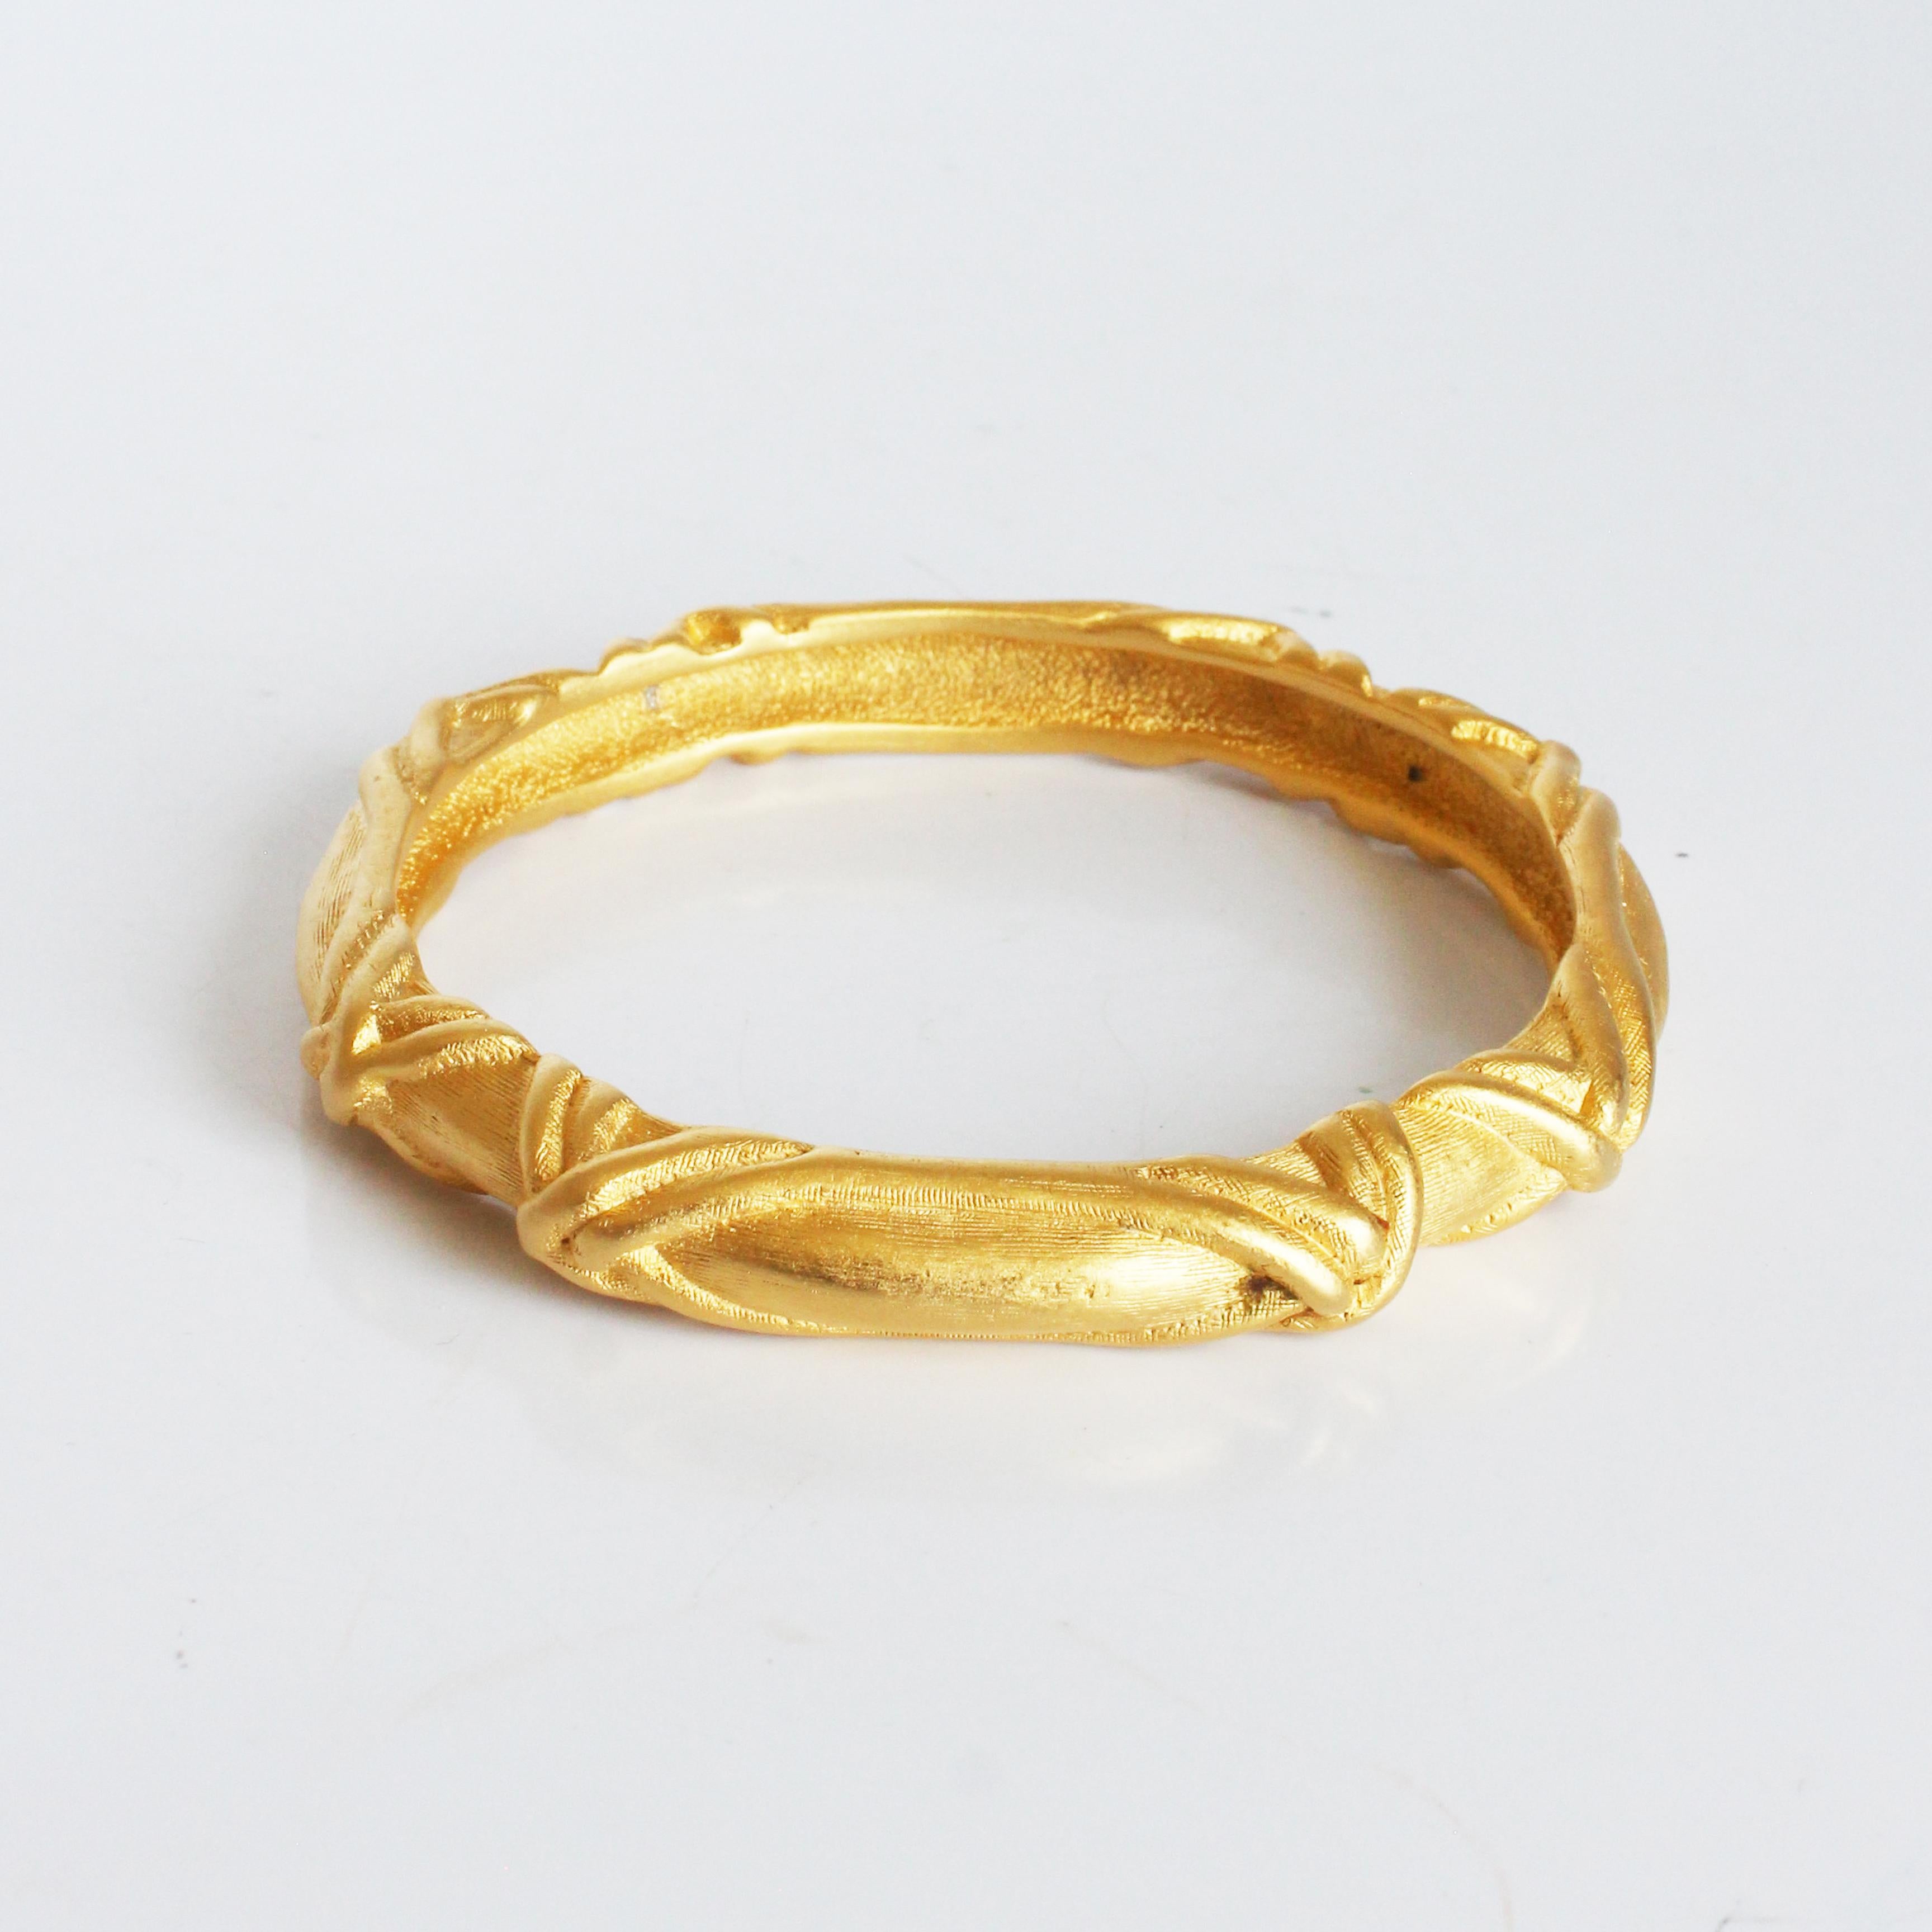 Givenchy Bracelet Bangle Gold Metal Textured Abstract Vintage 80s Jewelry  For Sale 4